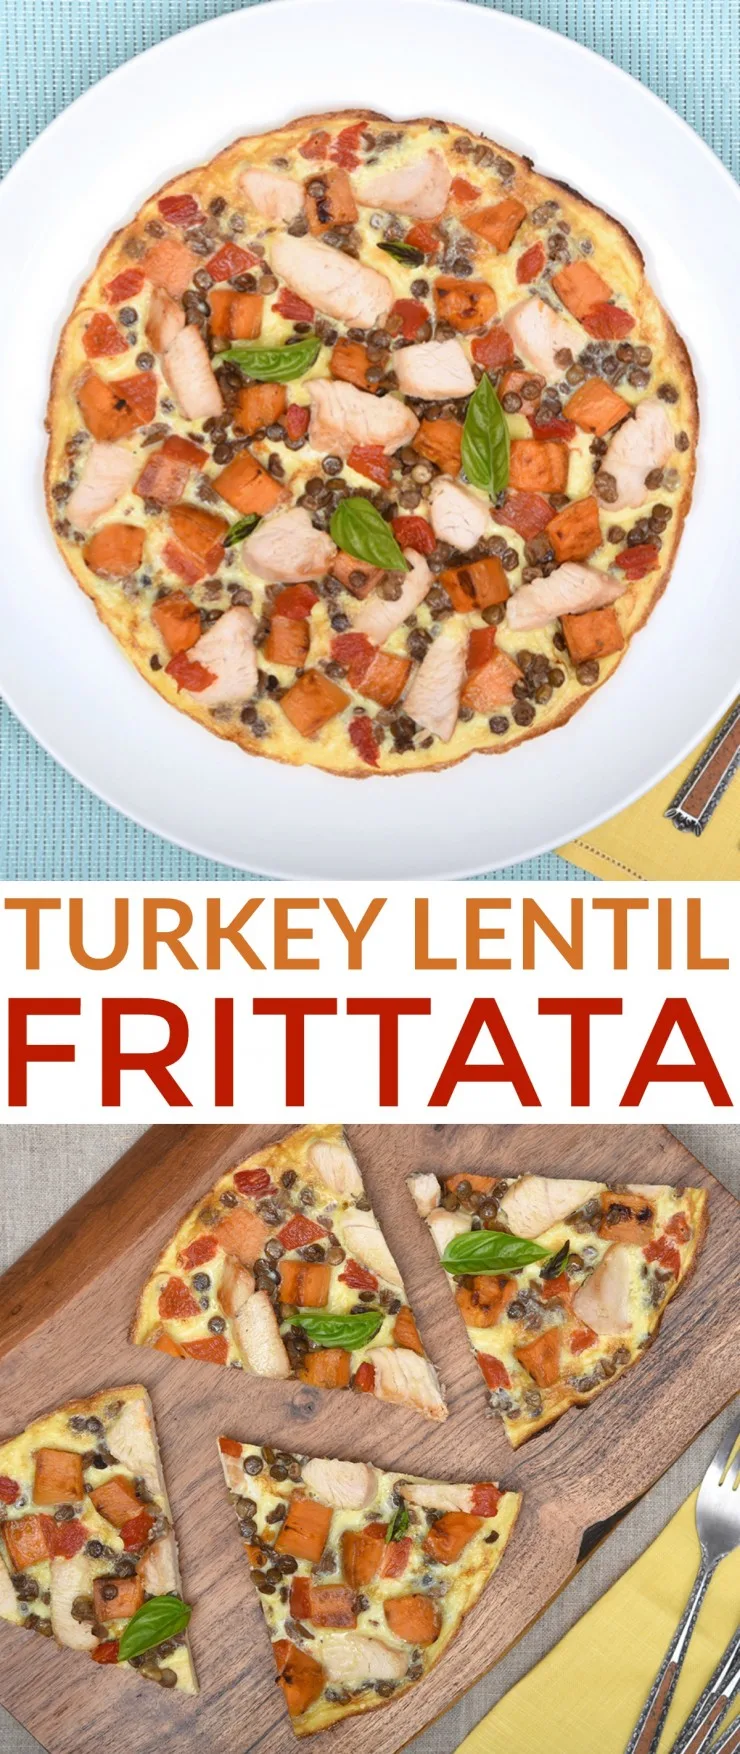 Protein-Packed Turkey Lentil Frittata is a healthy meal the whole family will enjoy for breakfast, lunch or dinner.